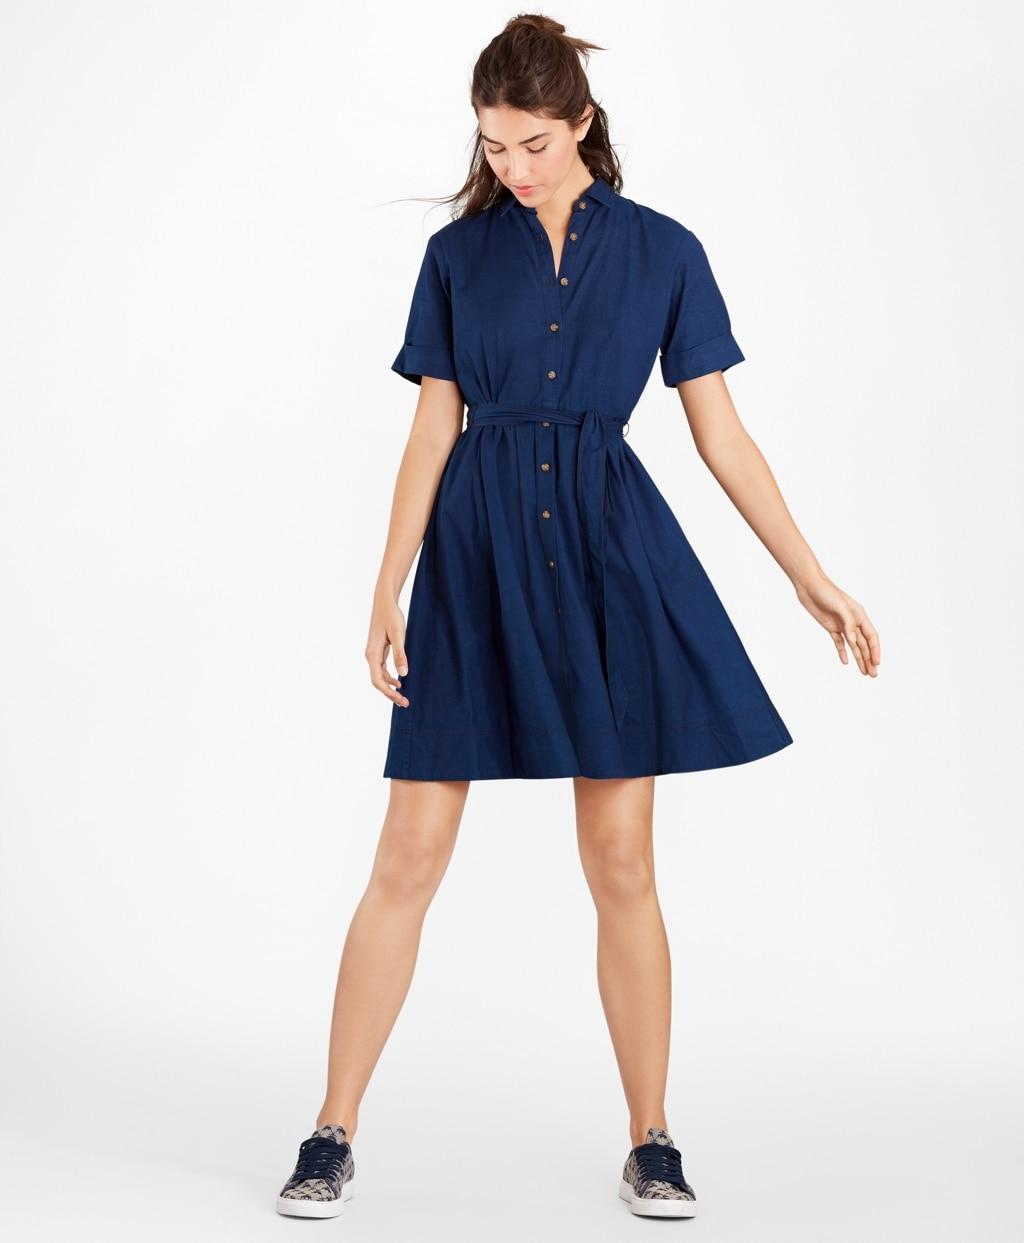 Brooks Brothers Cotton Oxford Shirt Dress in Navy (Blue) - Lyst